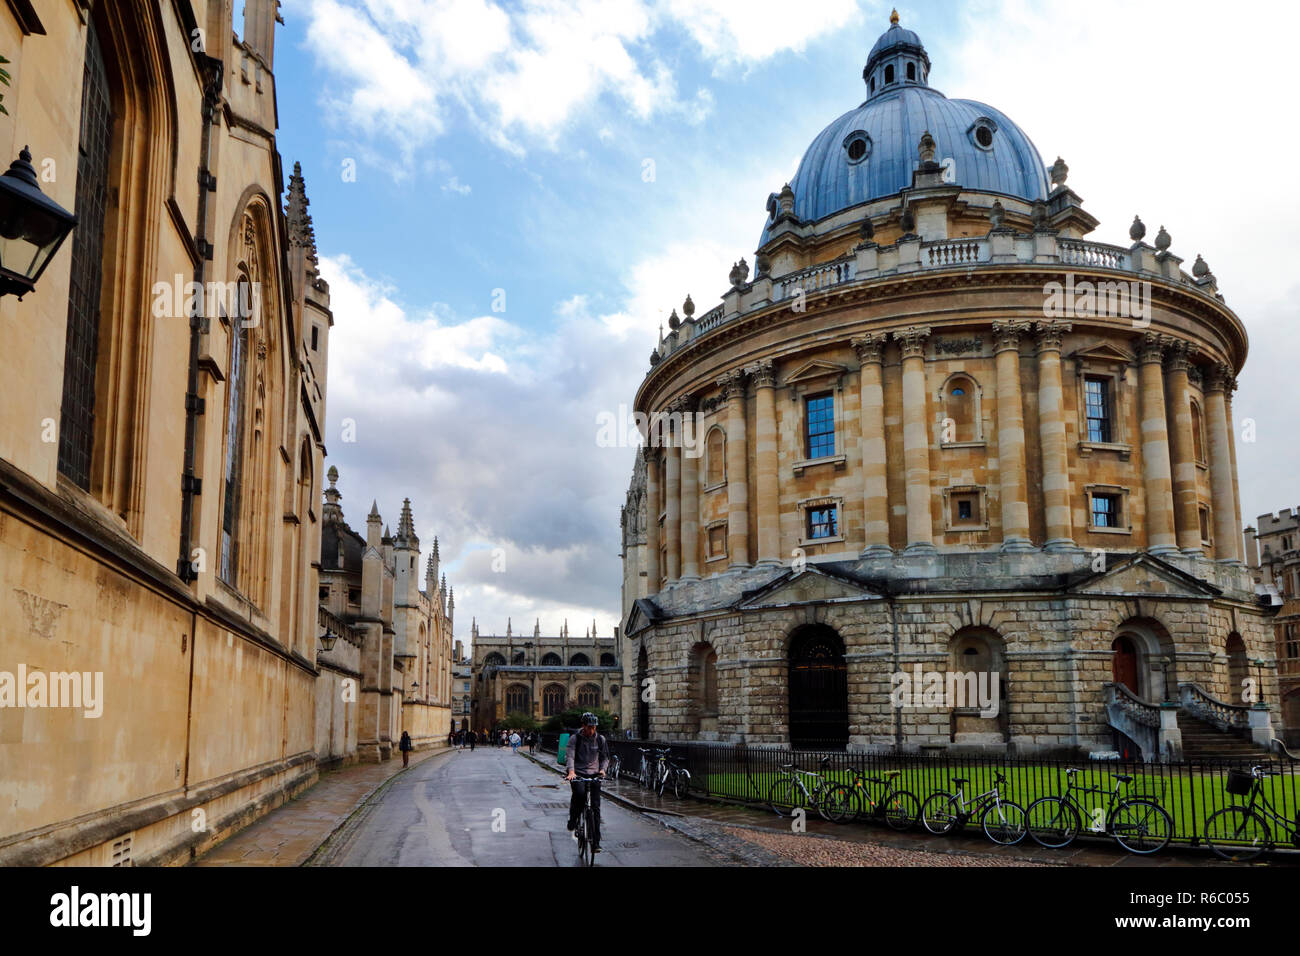 The Radcliffe Camera building and All Soul's College in Oxford, England Stock Photo